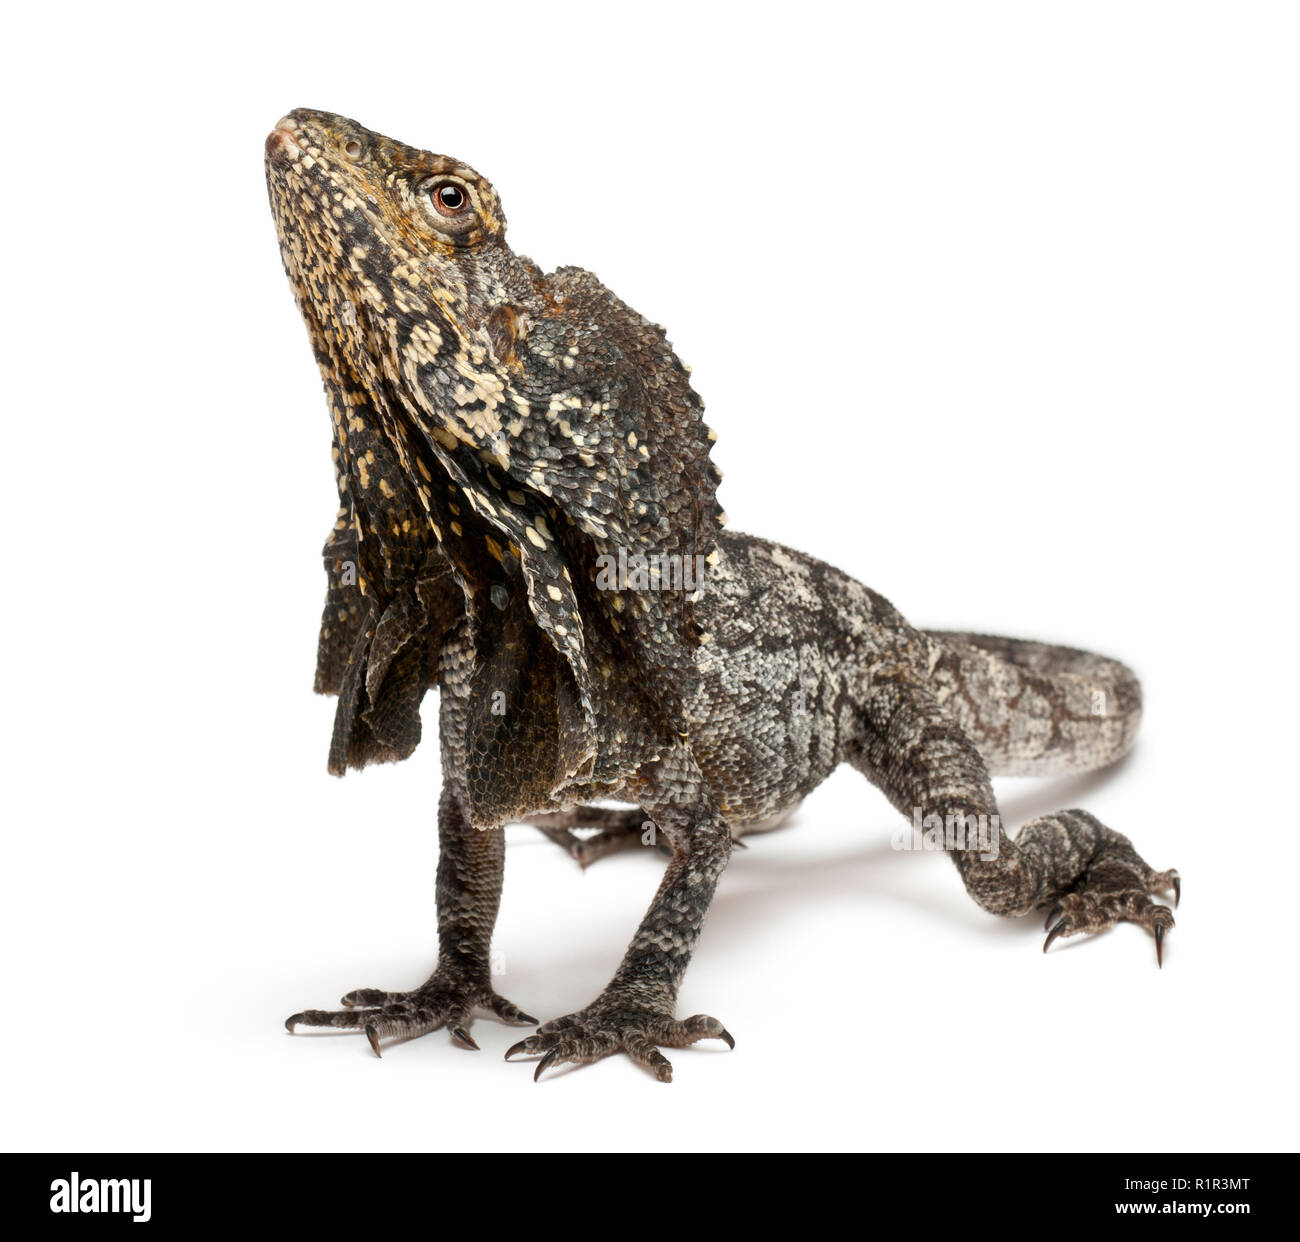 Frill-necked lizard also known as the frilled lizard, Chlamydosaurus kingii, in front of white background Stock Photo